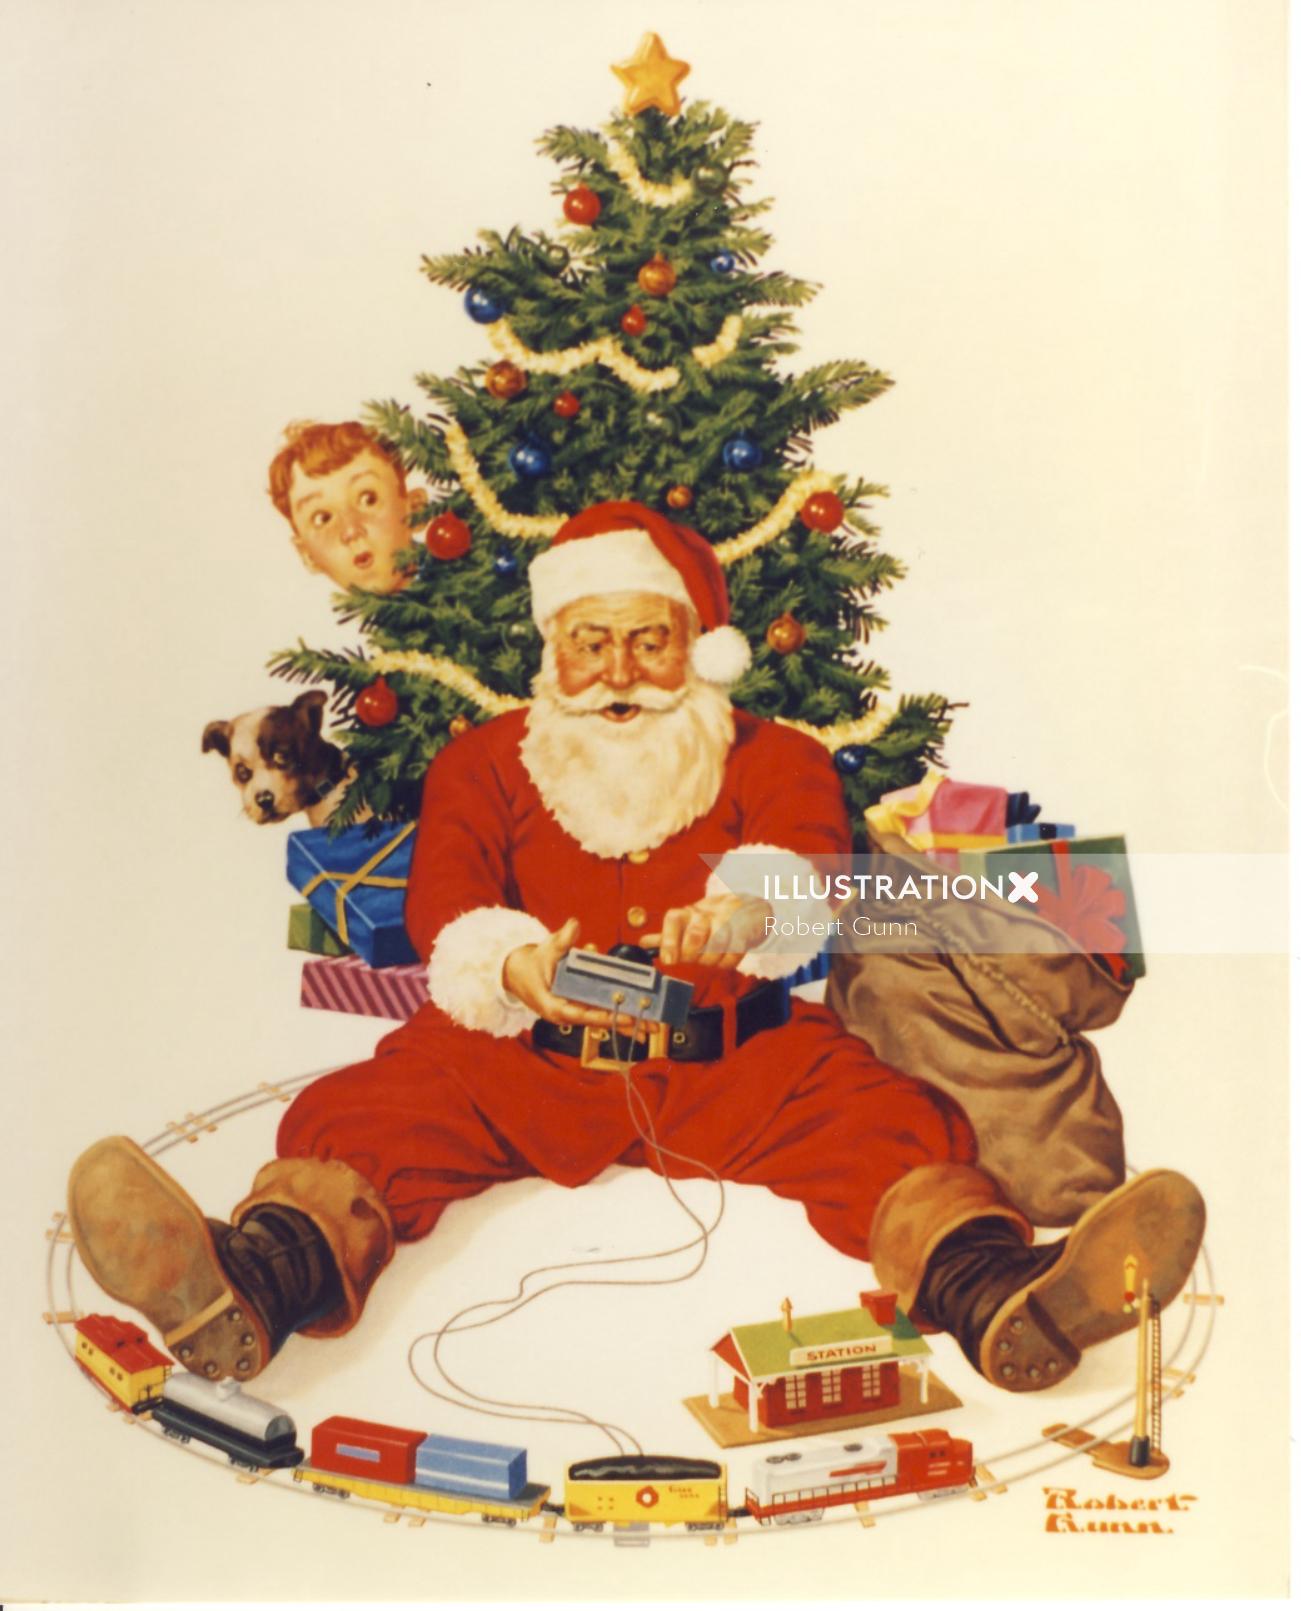 Illustration of Santa playing with toy train under tree